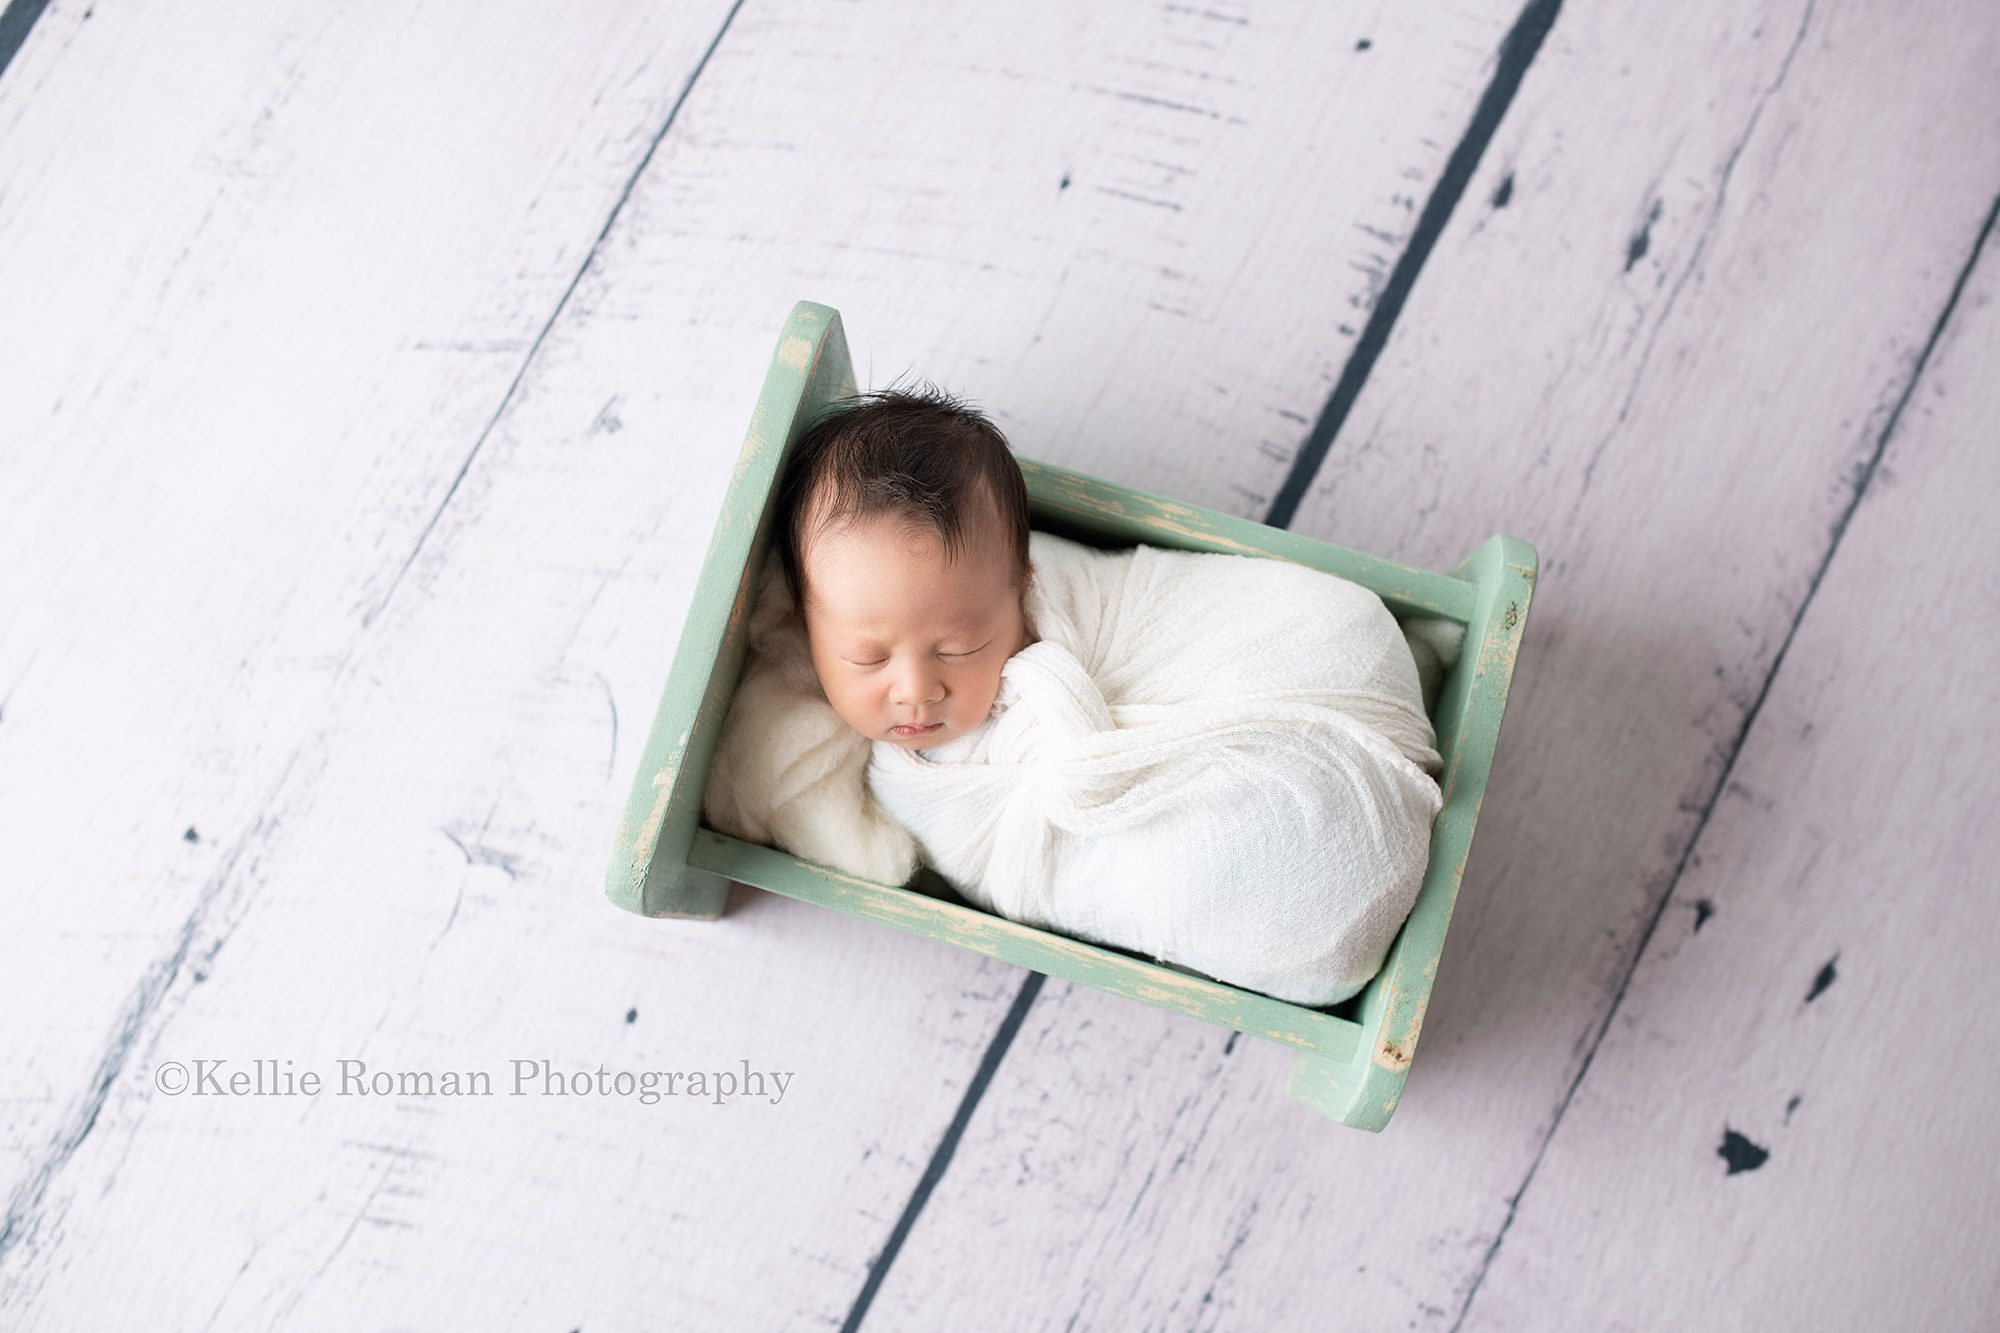 bright airy newborn session. A newborn baby boy is in a milwaukee photo studio. The baby is wrapped in a white swaddle wrap and is wearing a white sleepy hat with black stars. The baby is resting on white fluff and is sleeping on his back on a teal bed.